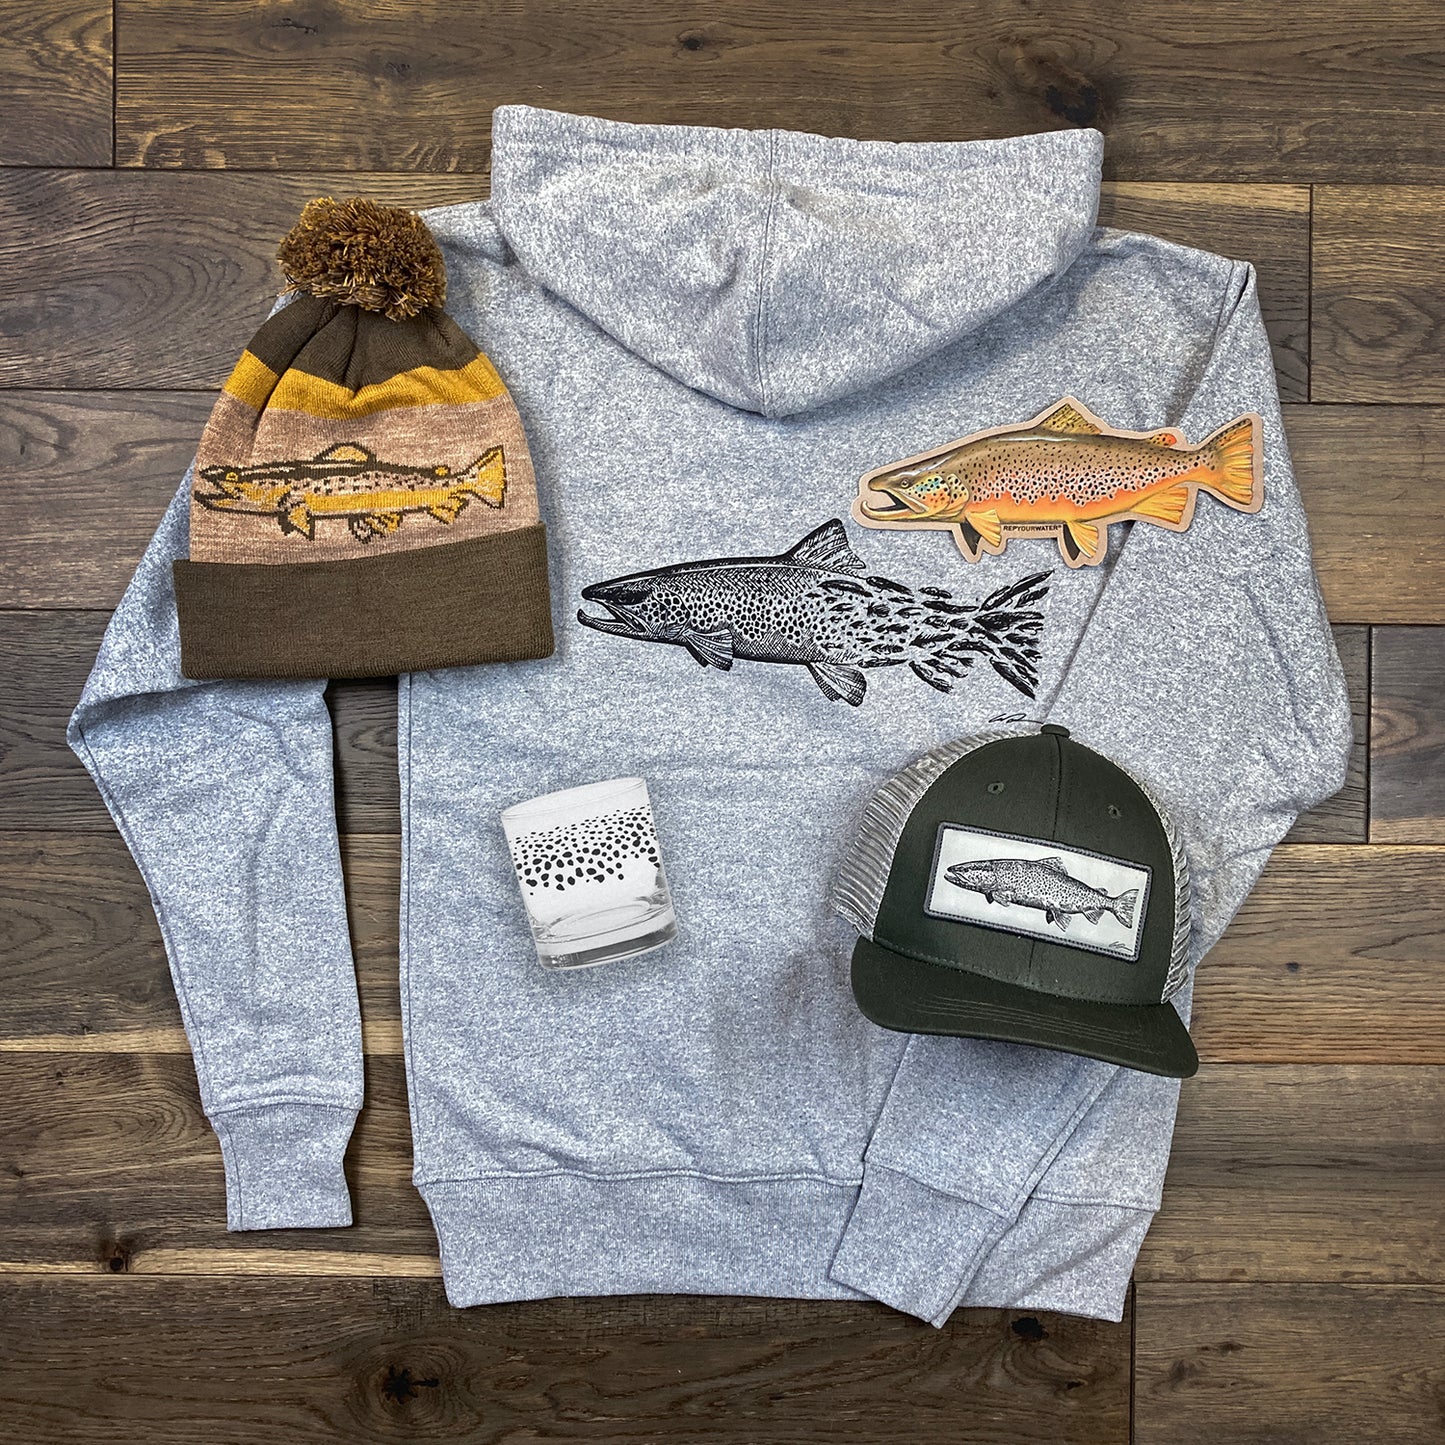 A hooded sweatshirt, knit hat, brimmed hat, glass and sticker A hat, shirt, pair of socks and two stickers laid out on a wood floor.